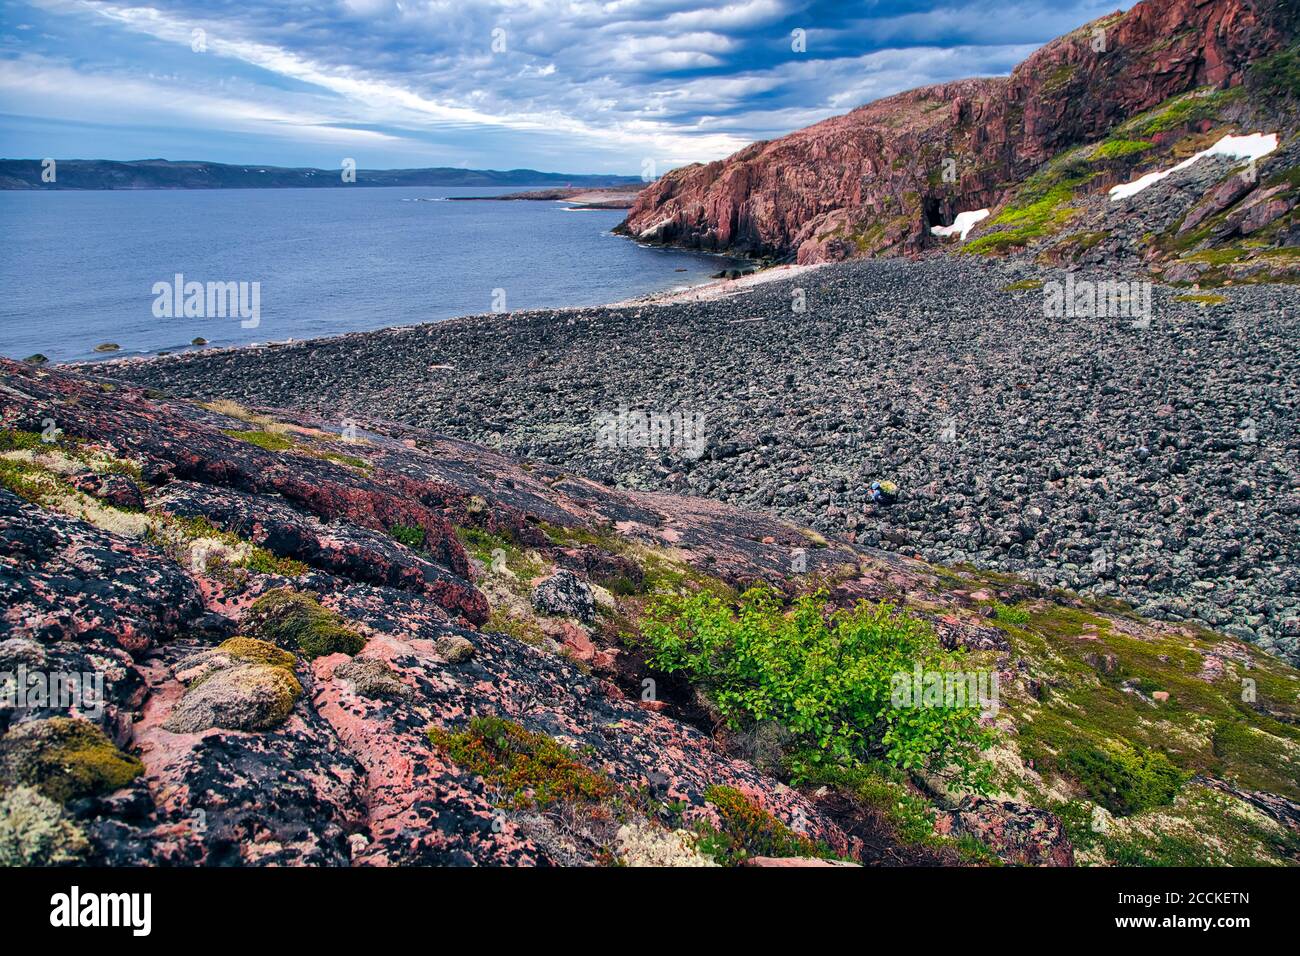 Cliffs and rocky beach of Barents Sea Stock Photo